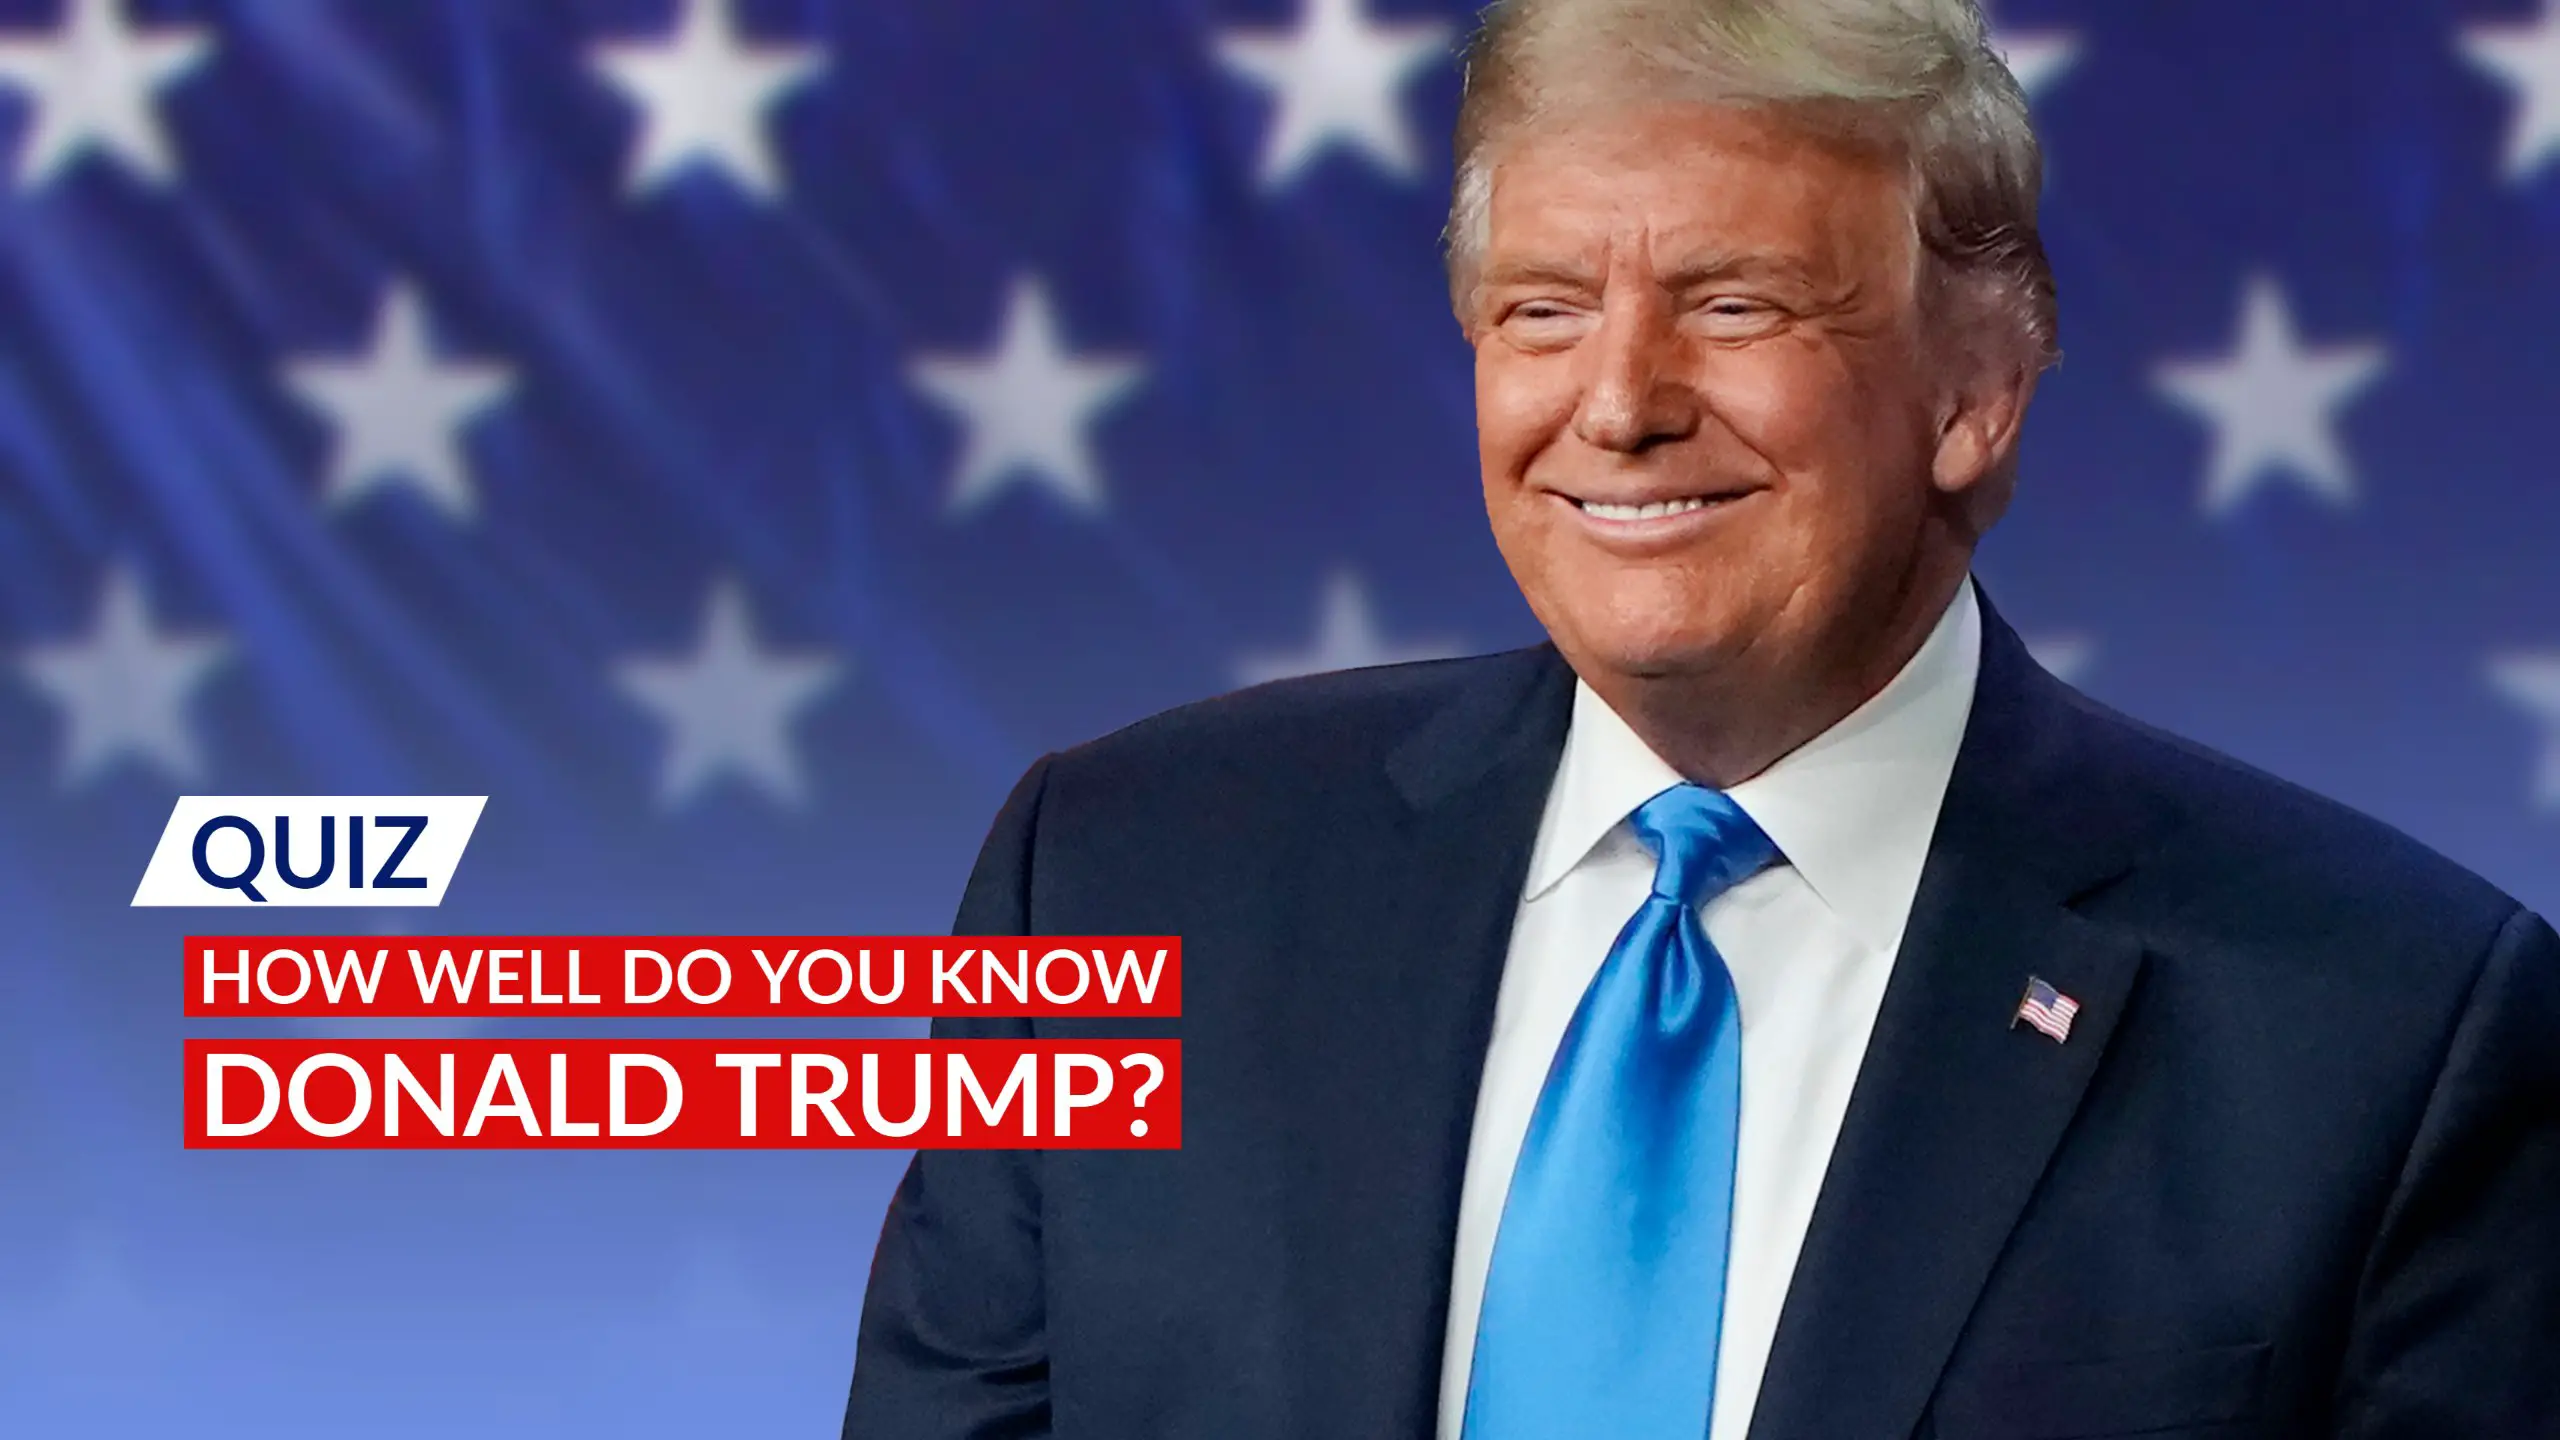 QUIZ: How well do you know Donald Trump?